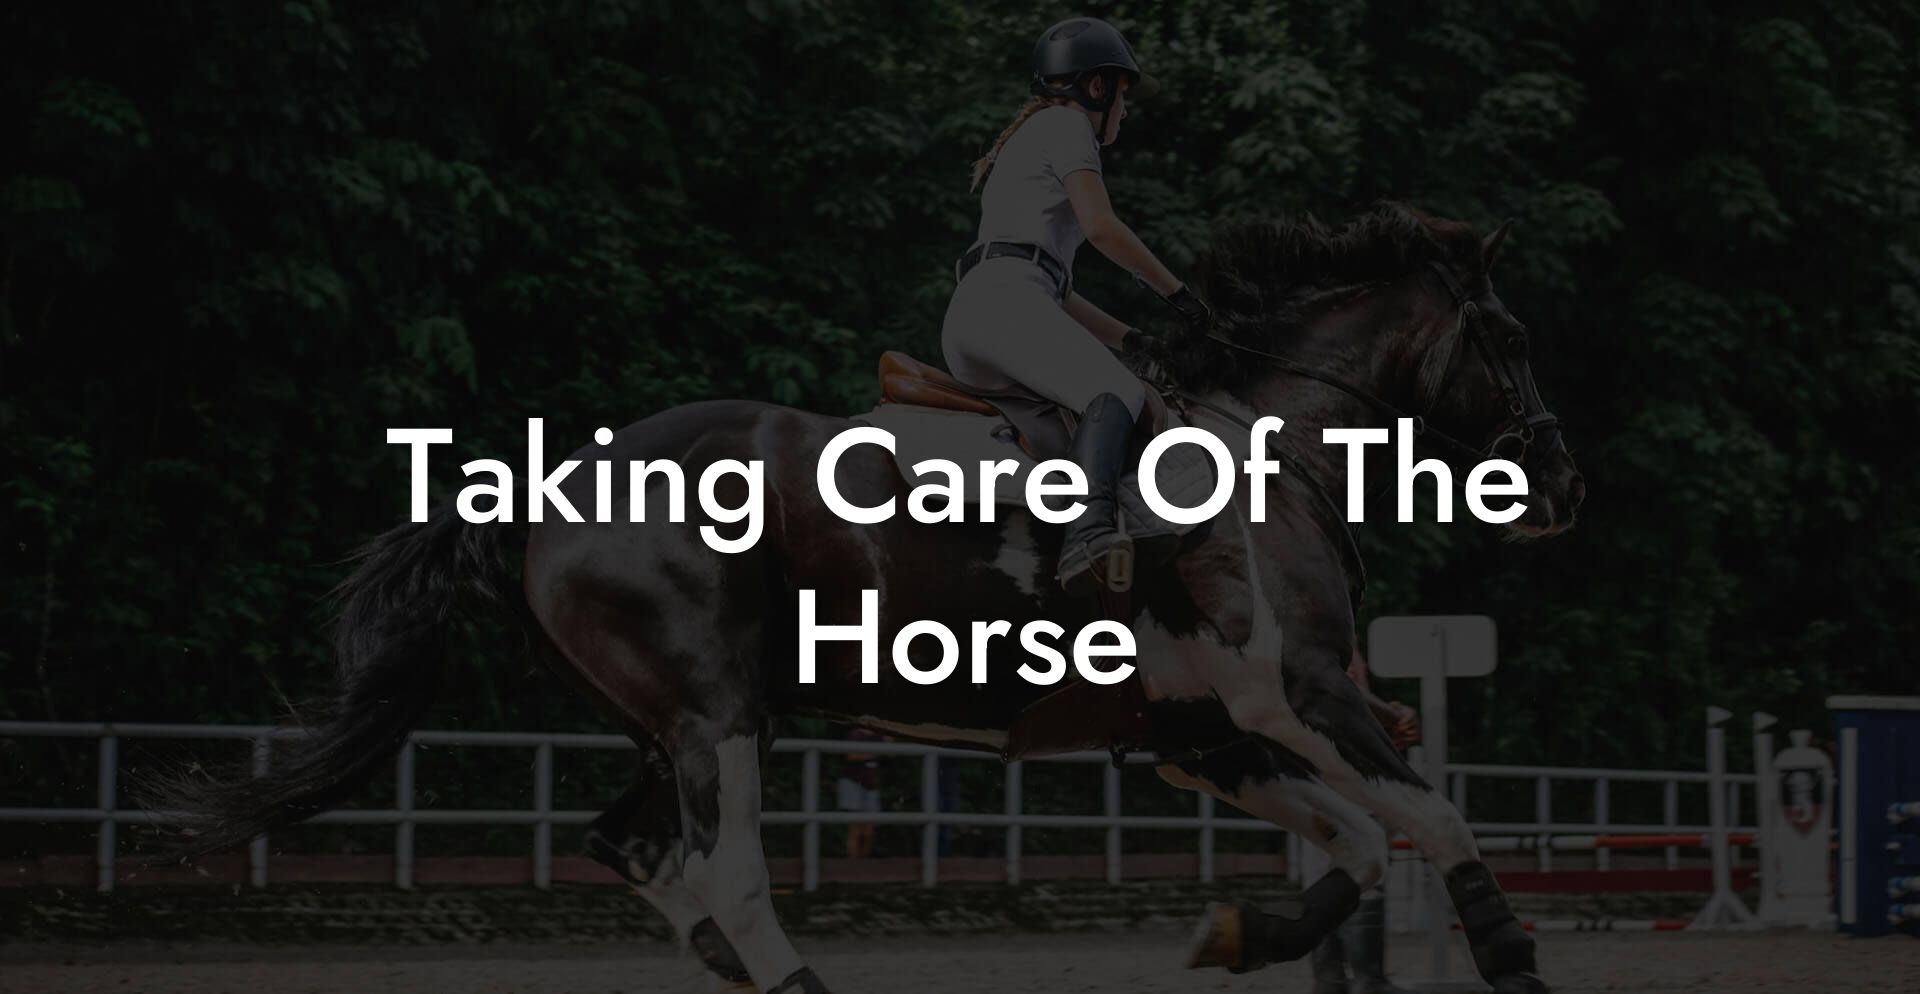 Taking Care Of The Horse